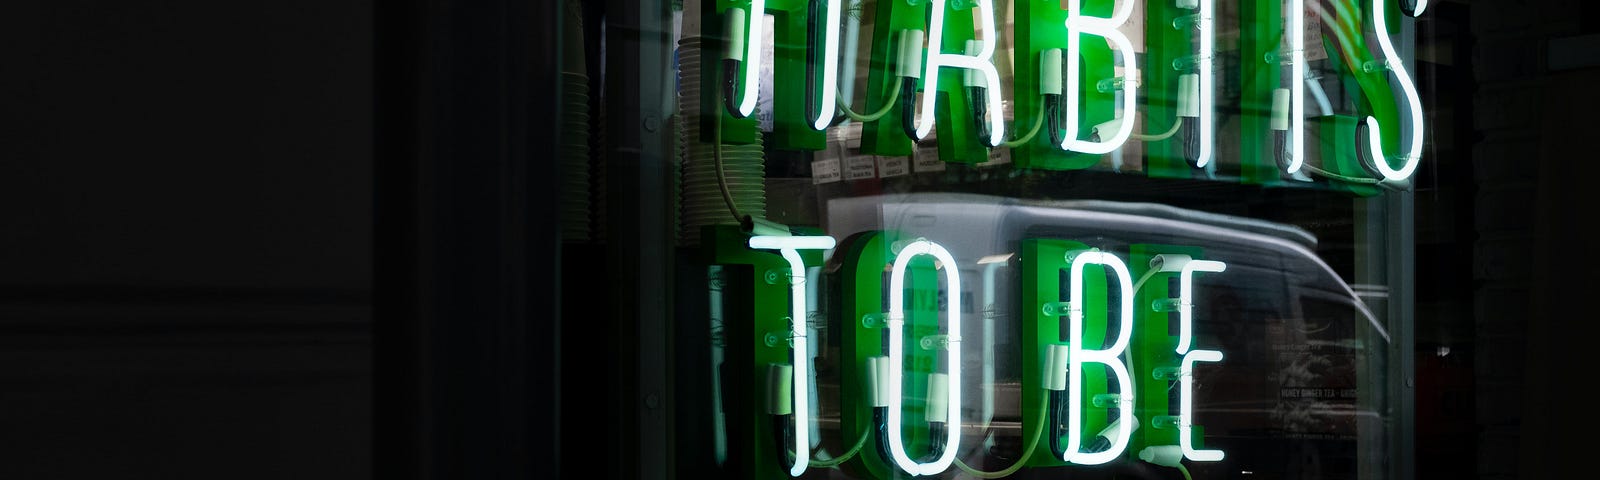 An illuminated neon sign saying “Habits to be made”